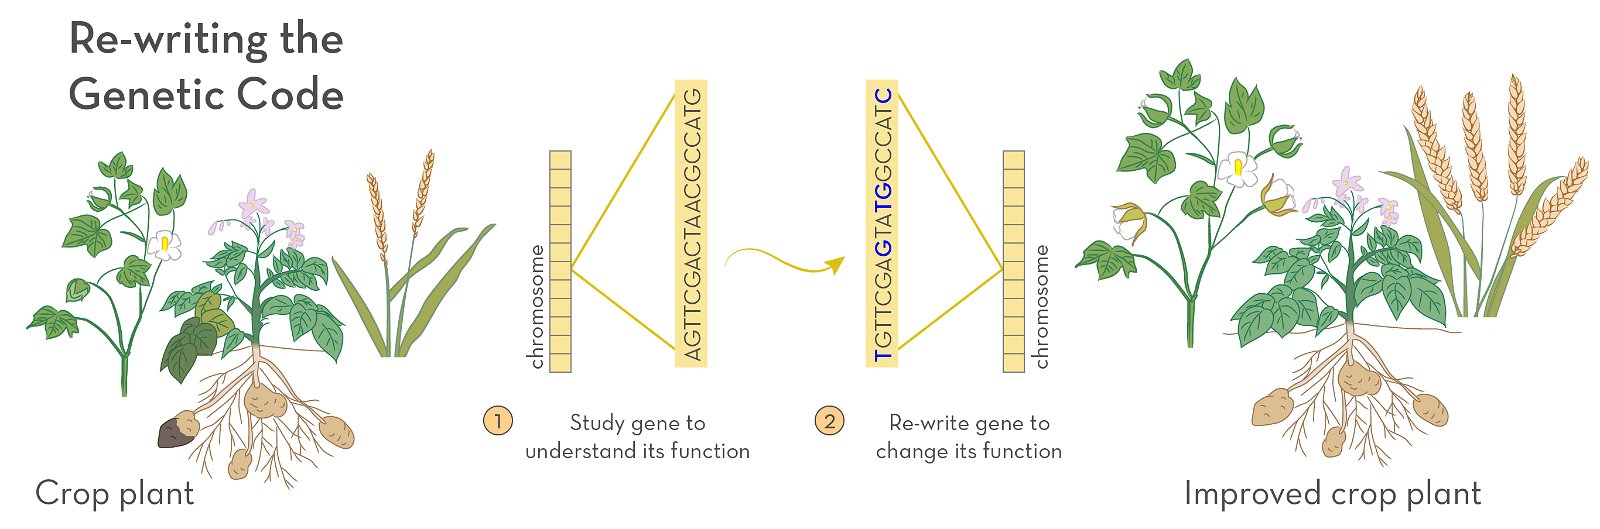 info graphic showing gene editing